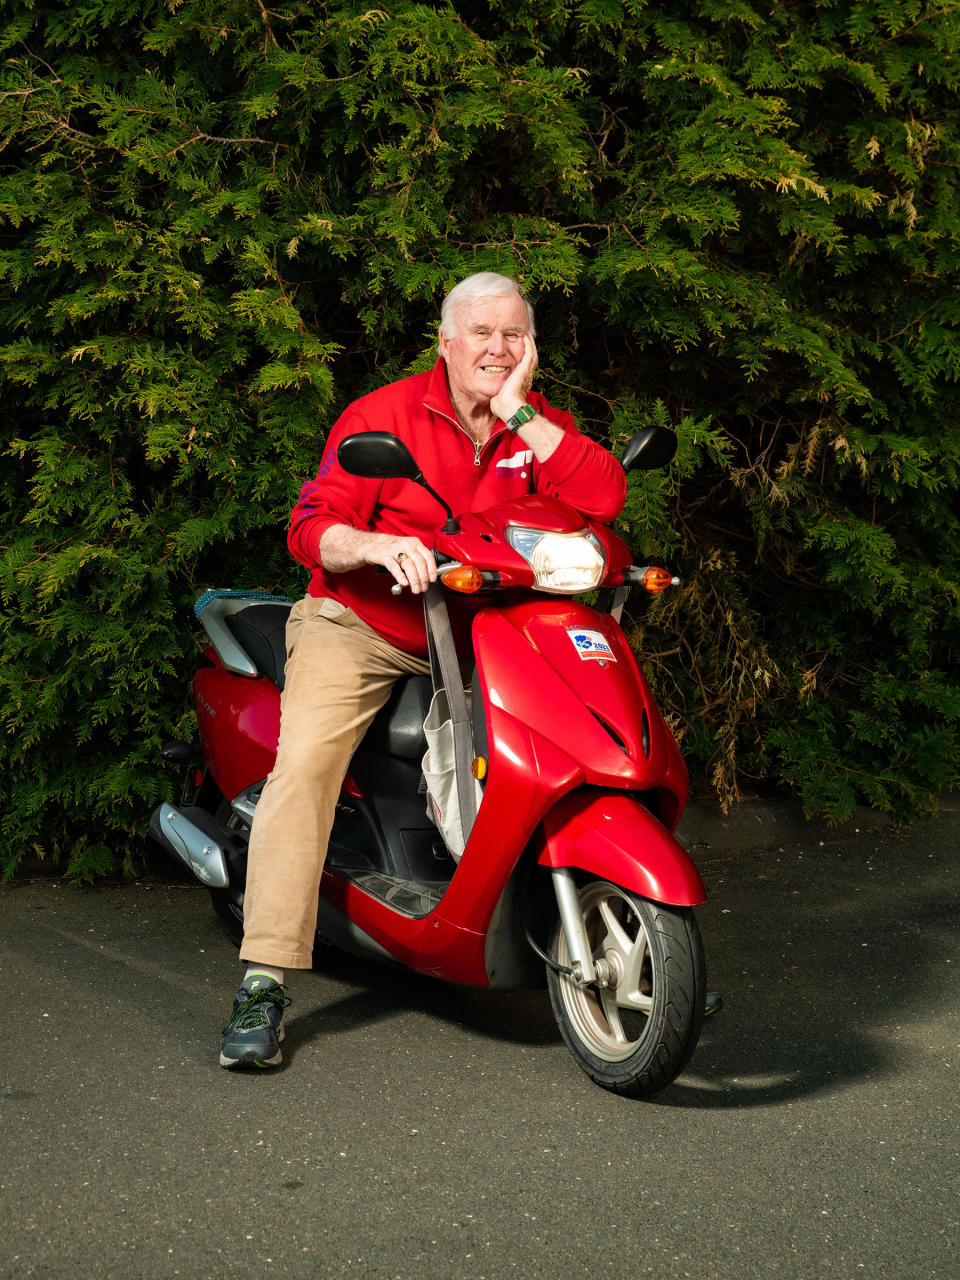 Jim Byrne poses for a portrait with his scooter outside of his home in Connecticut.<span class="copyright">Evan Angelastro for TIME</span>